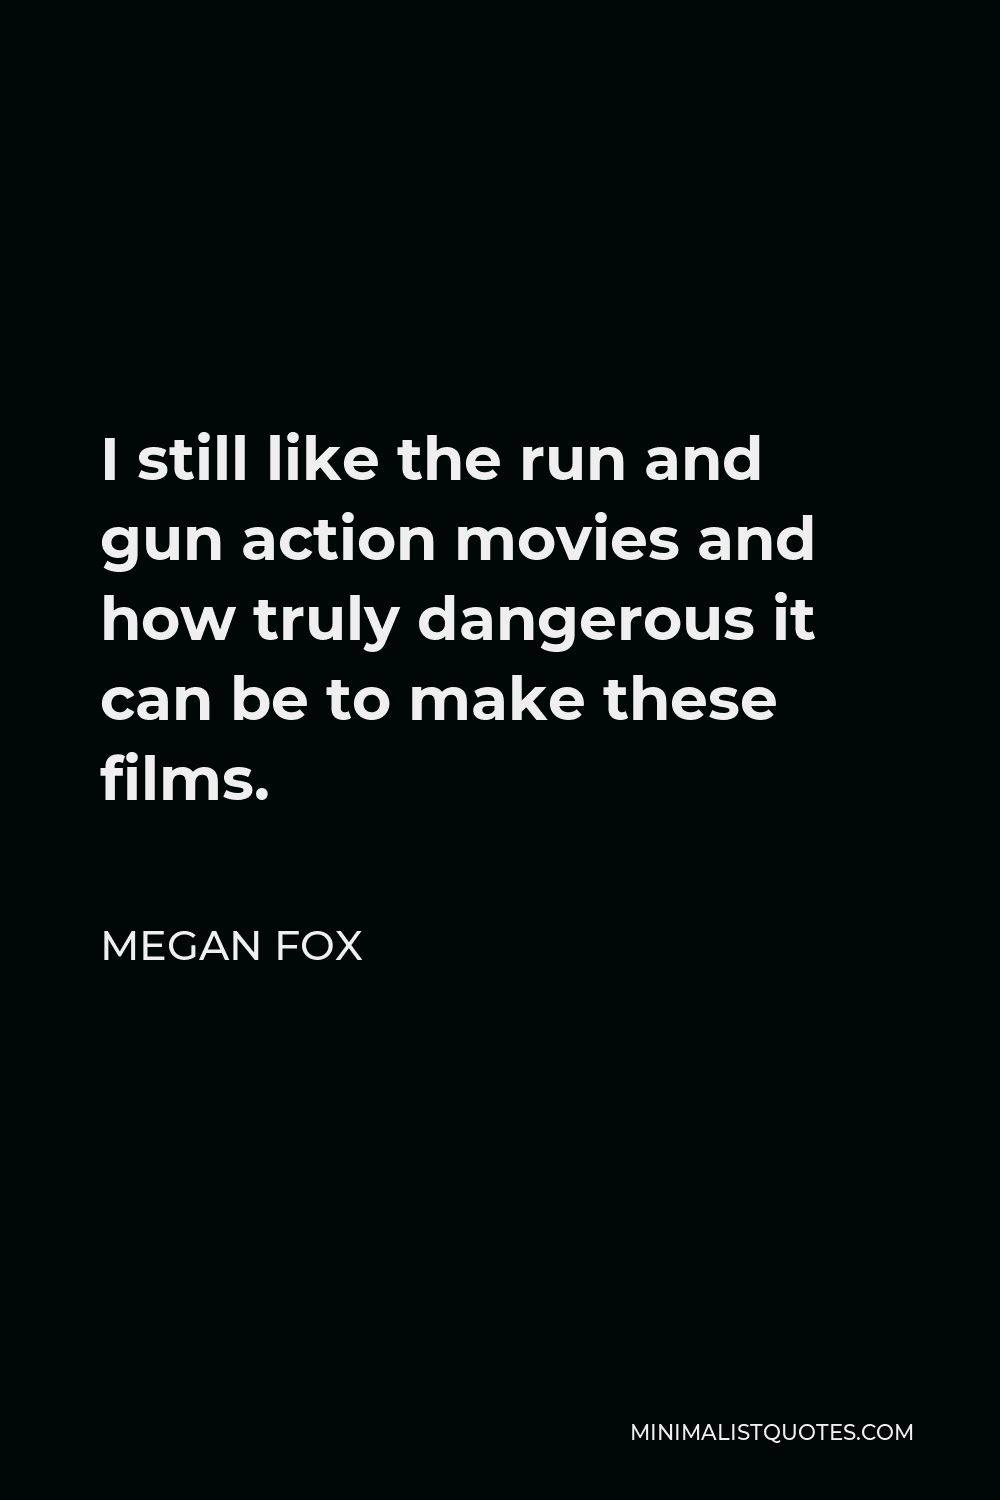 Megan Fox Quote - I still like the run and gun action movies and how truly dangerous it can be to make these films.